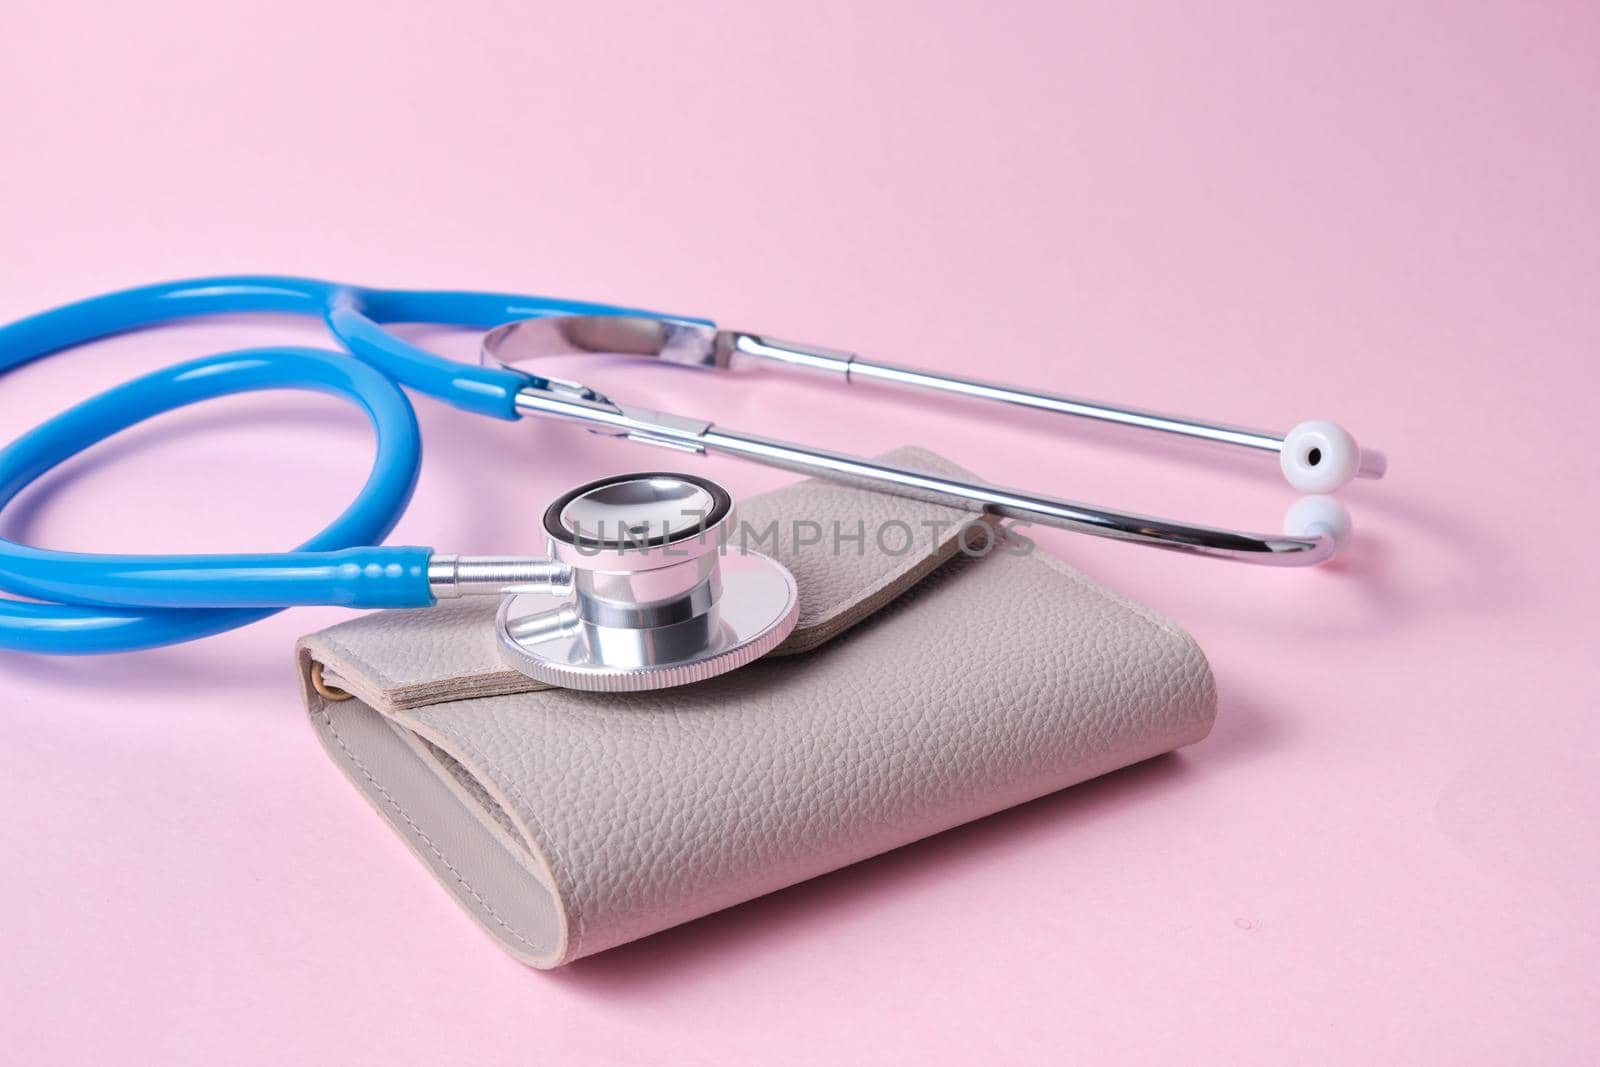 Stethoscope on an old wallet on pink background. the concept of monitoring income and expenses, savings and financial literacy